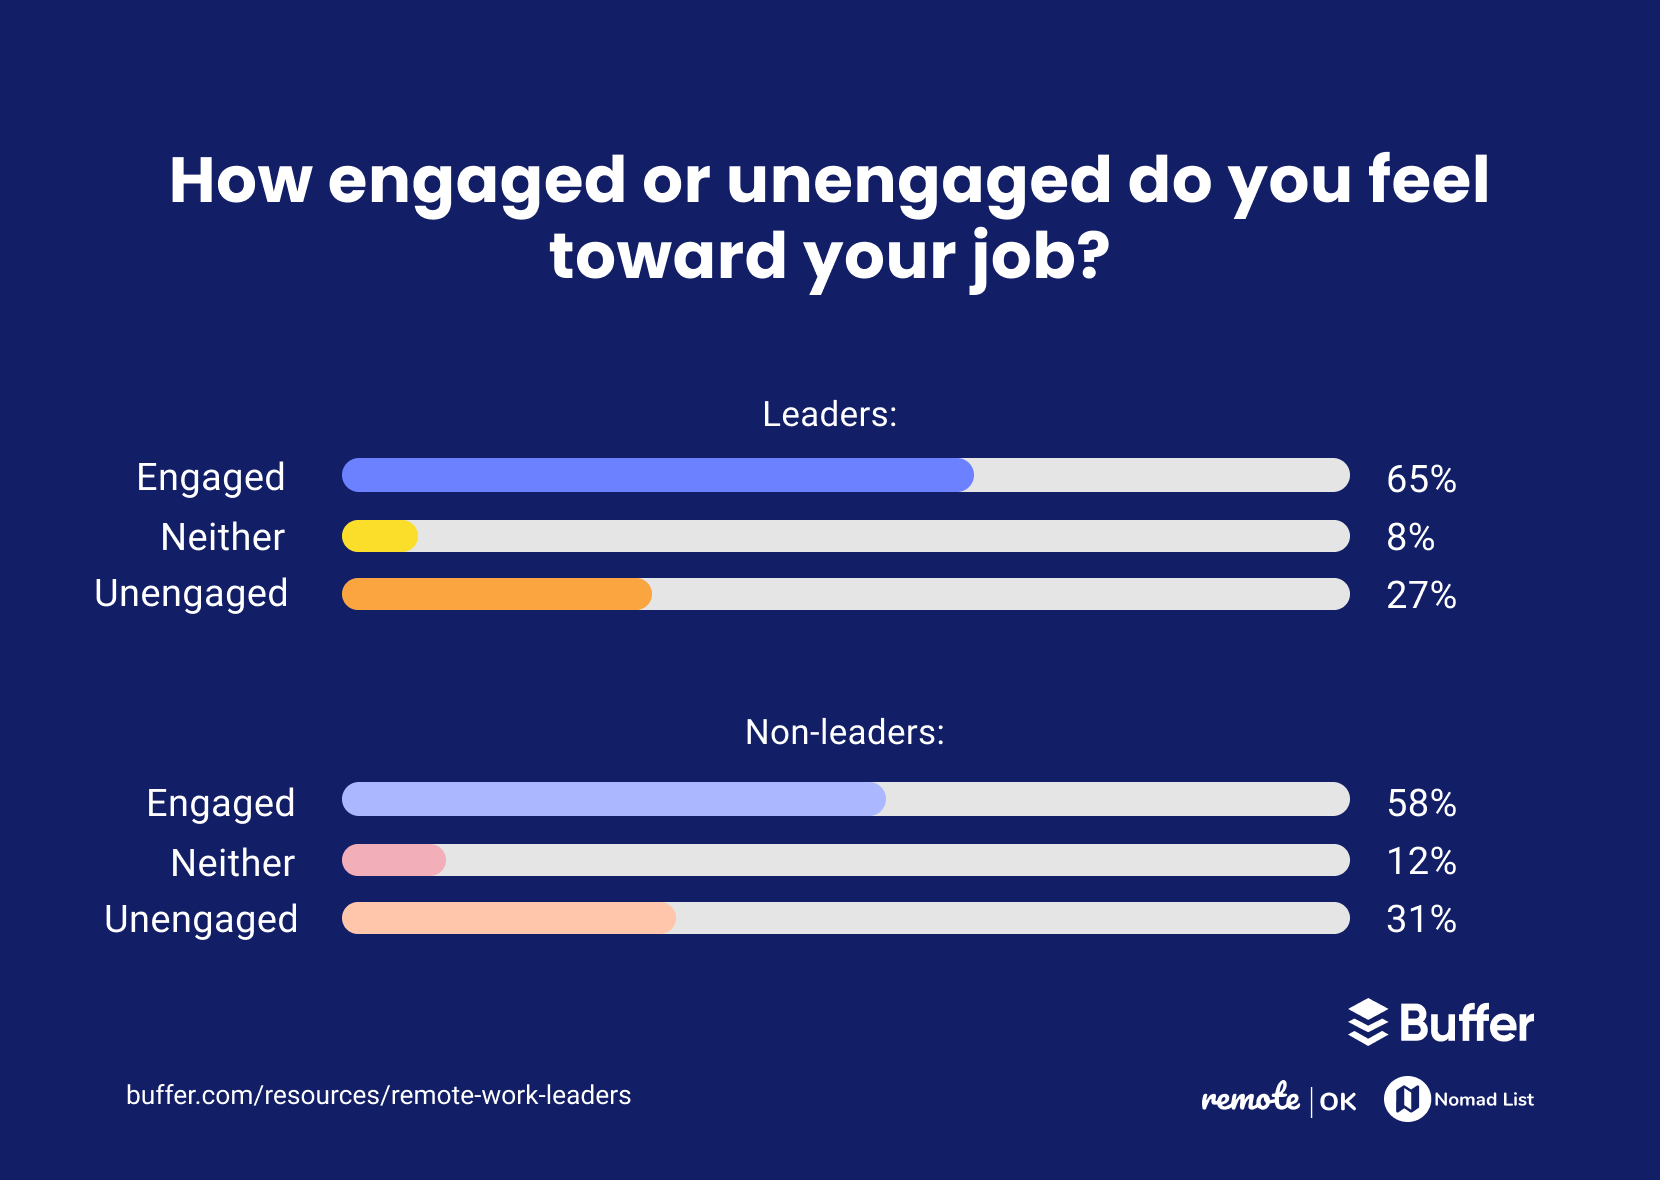 Engaged - How Are Leaders Experiencing Remote Work?